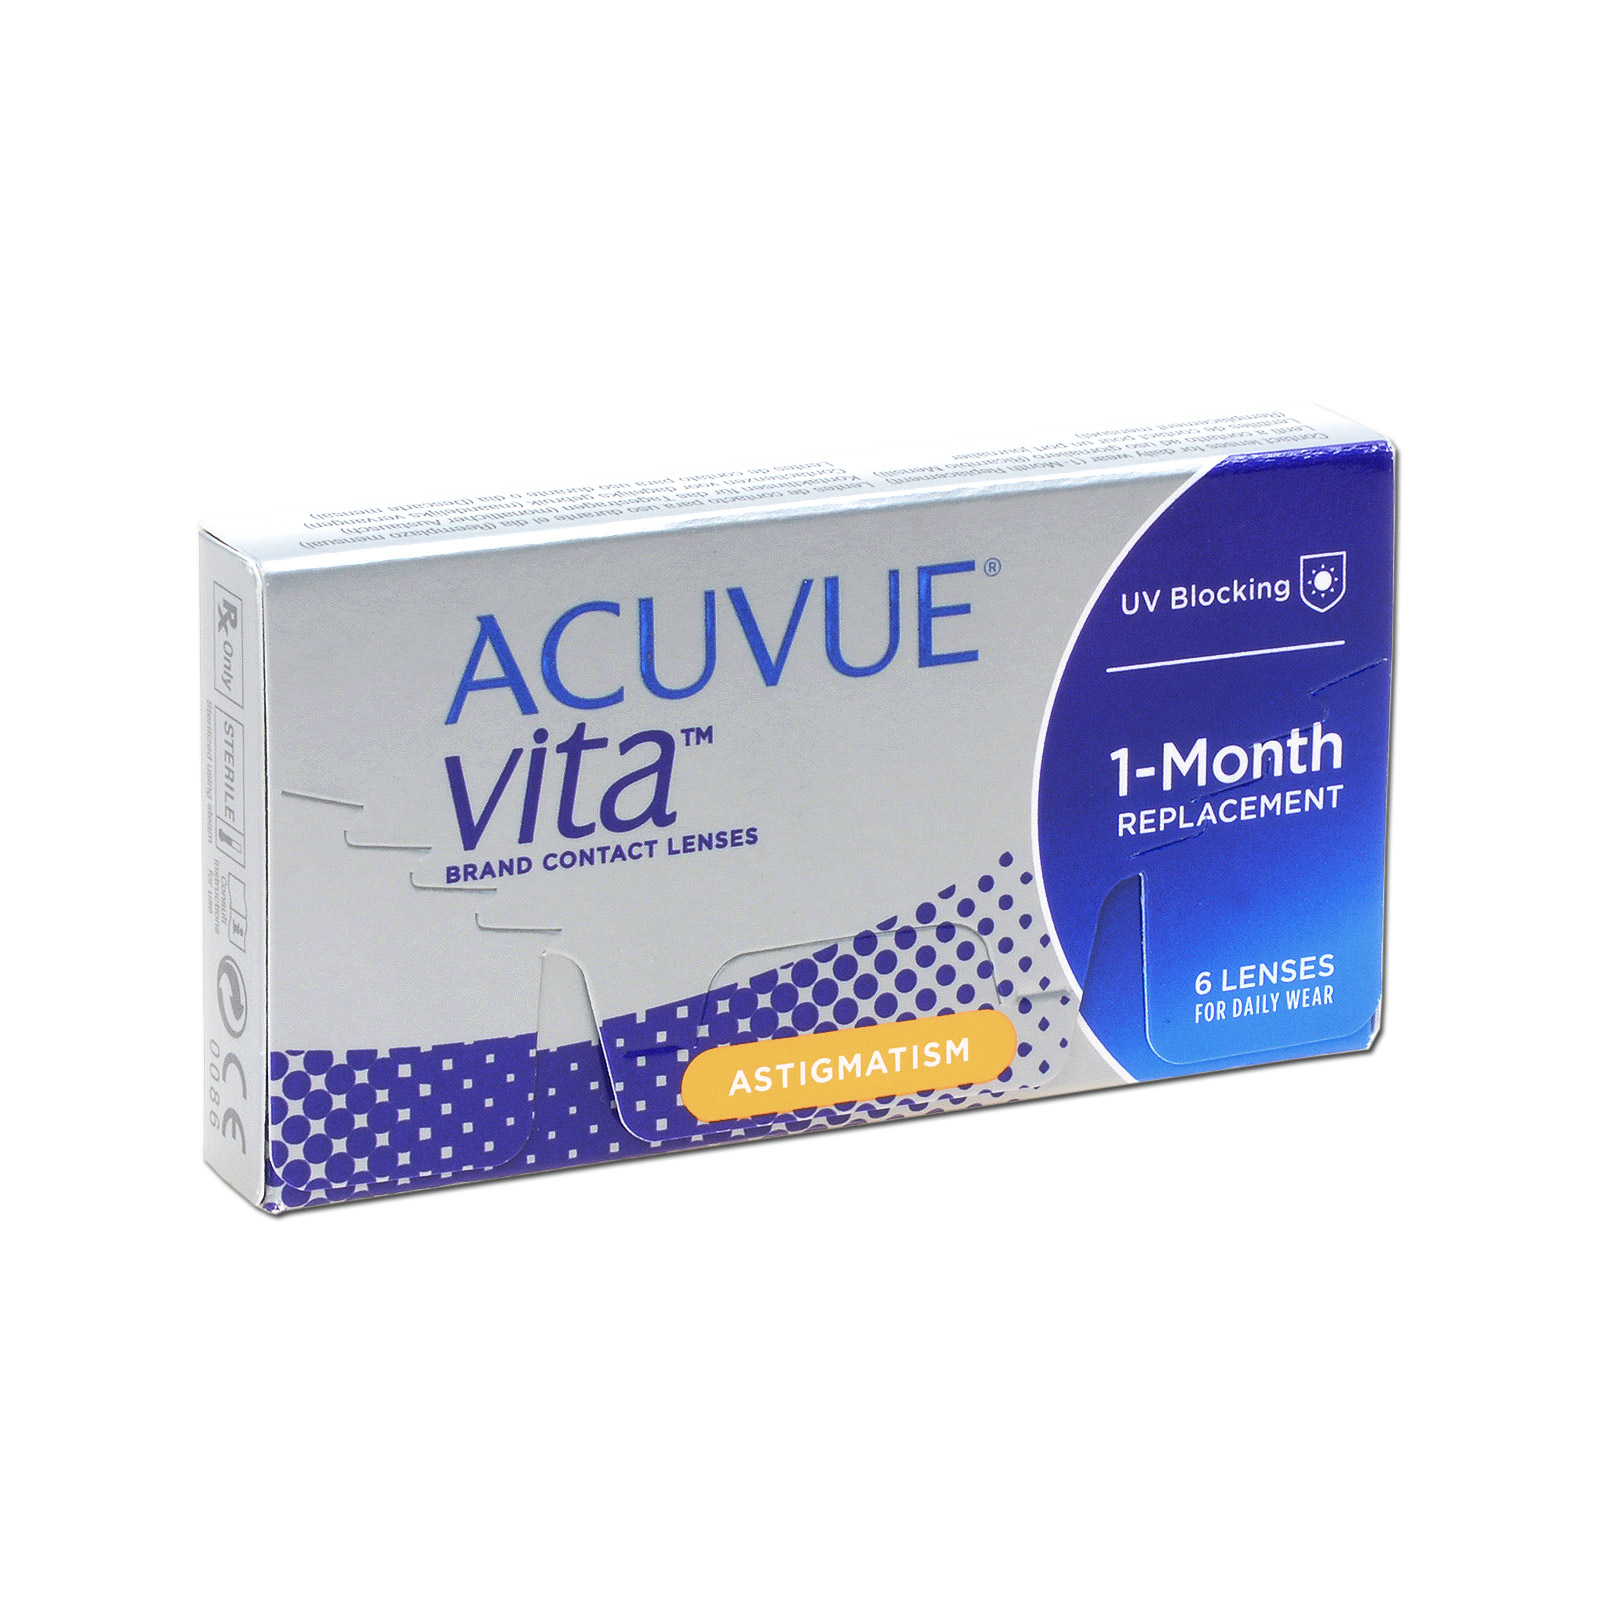 acuvue-vita-for-astigmatism-vision-contact